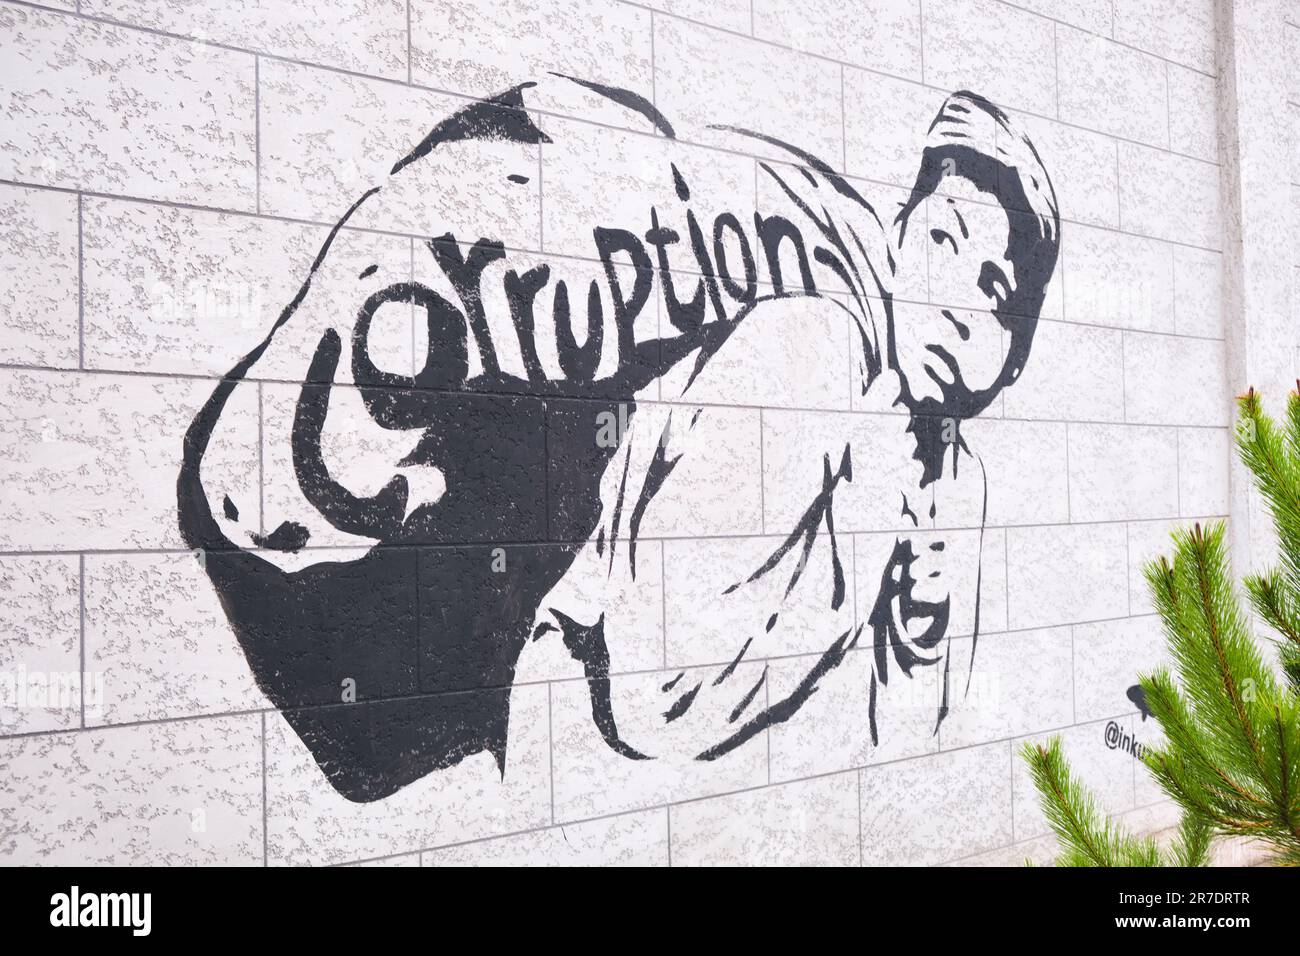 Political spray painted graffiti on a wall, criticizing the corruption in the country. In Tashkent, Uzbekistan. Stock Photo